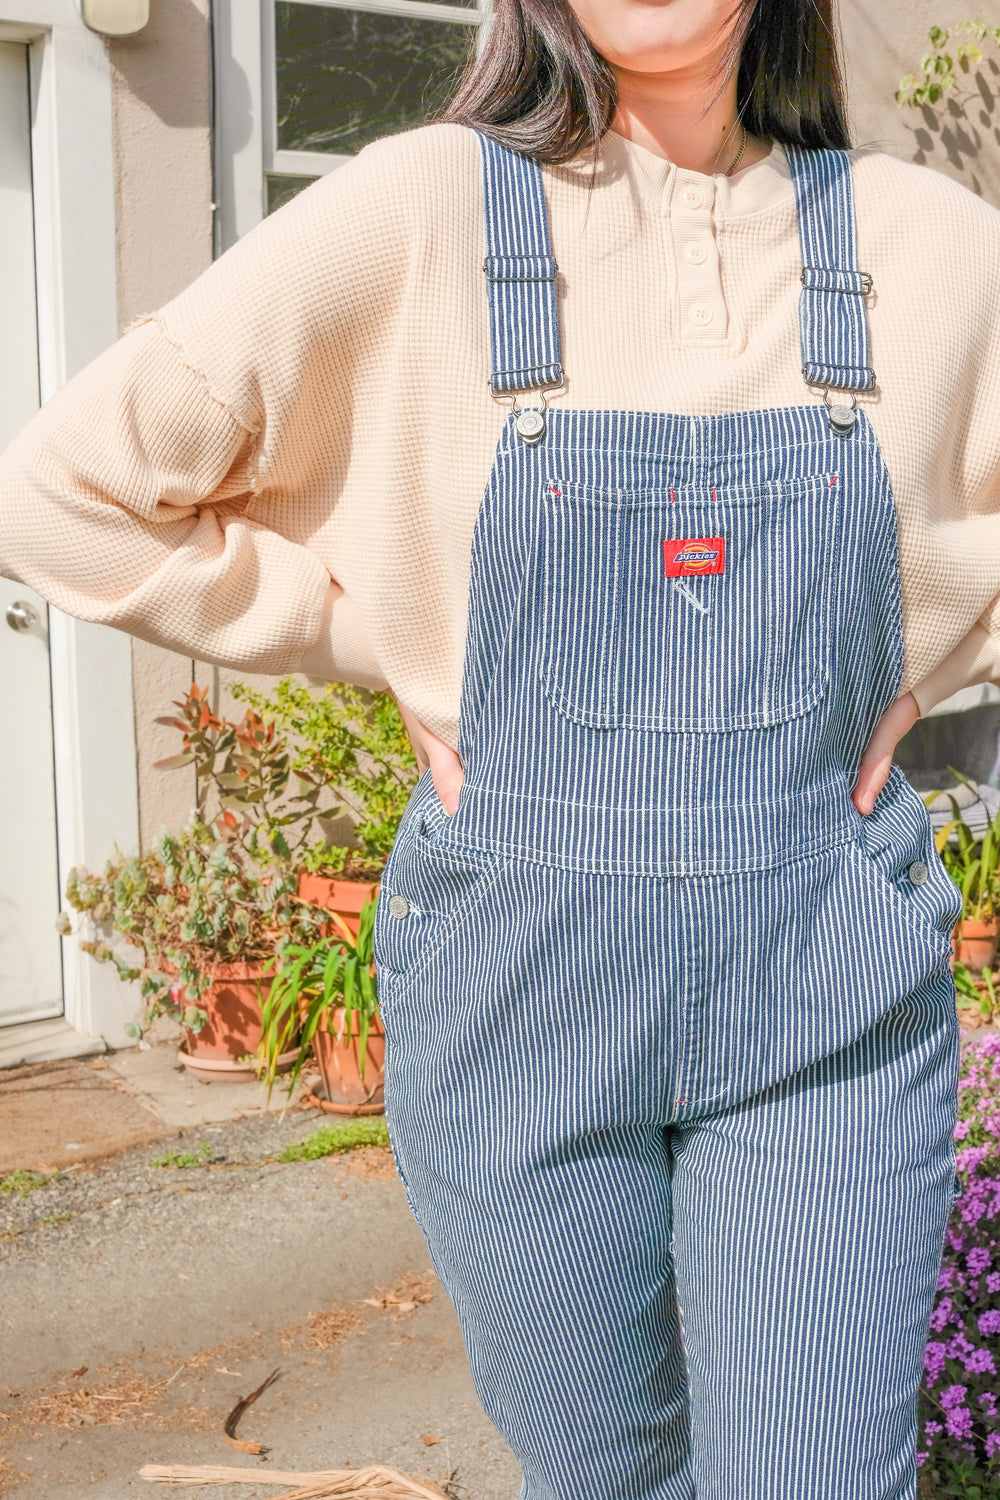 Railroad Relaxed Overalls